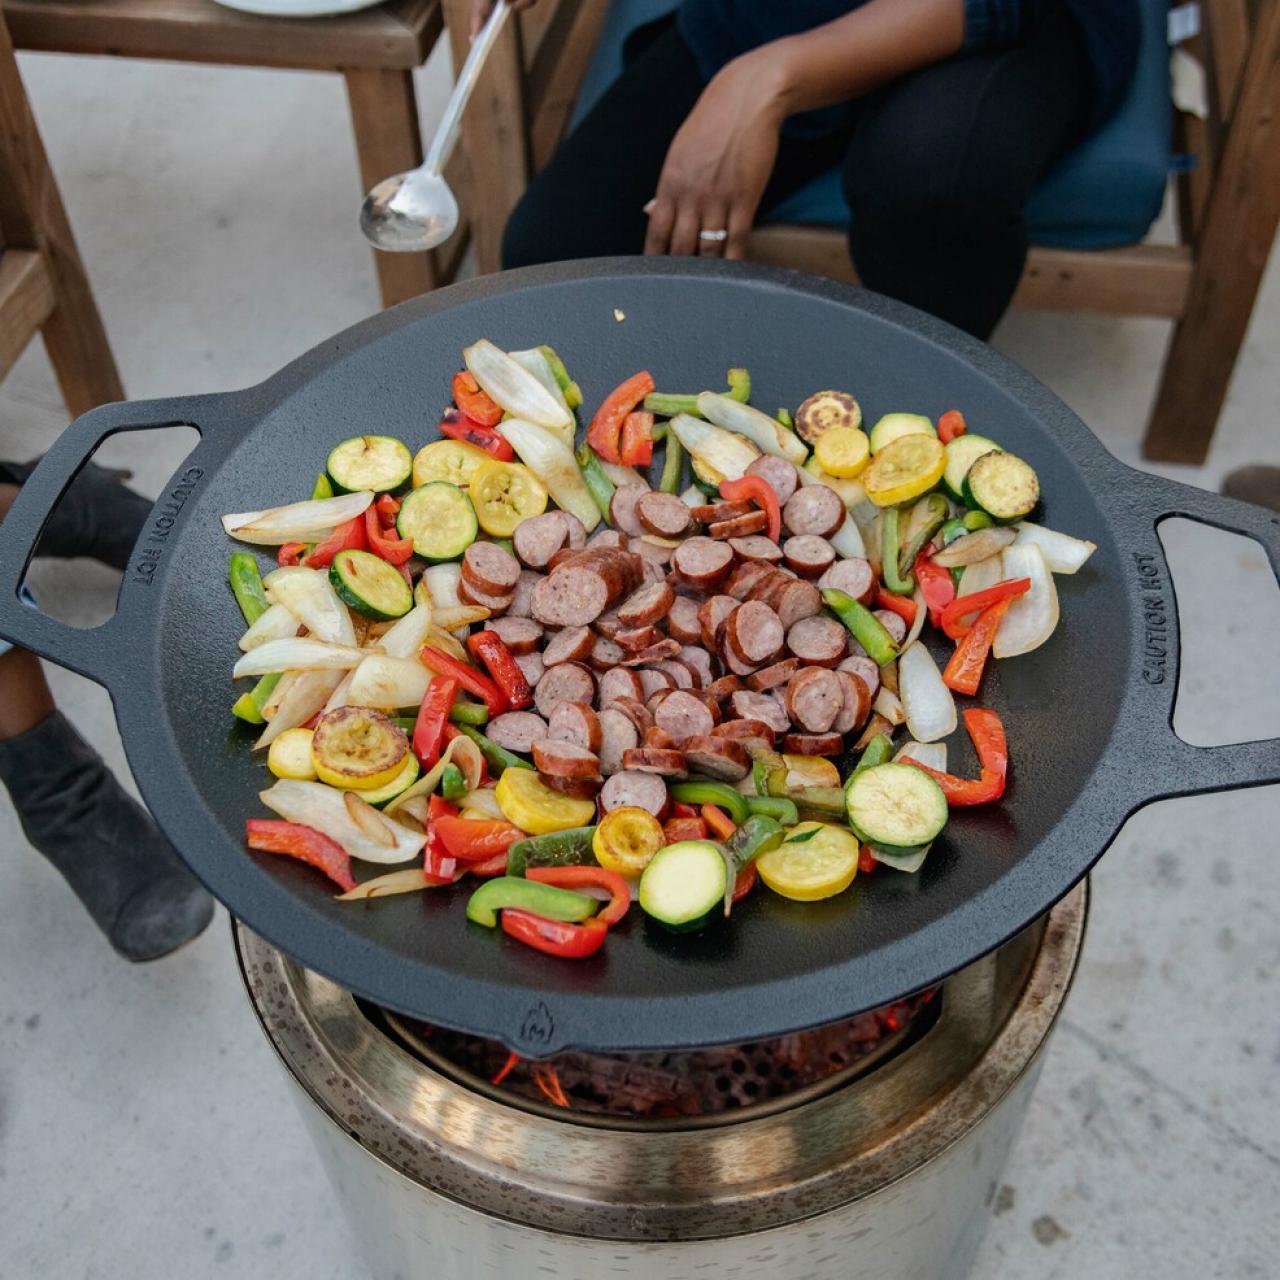 Fire Pit Grill System - Small, Cooking, Camp Accessories